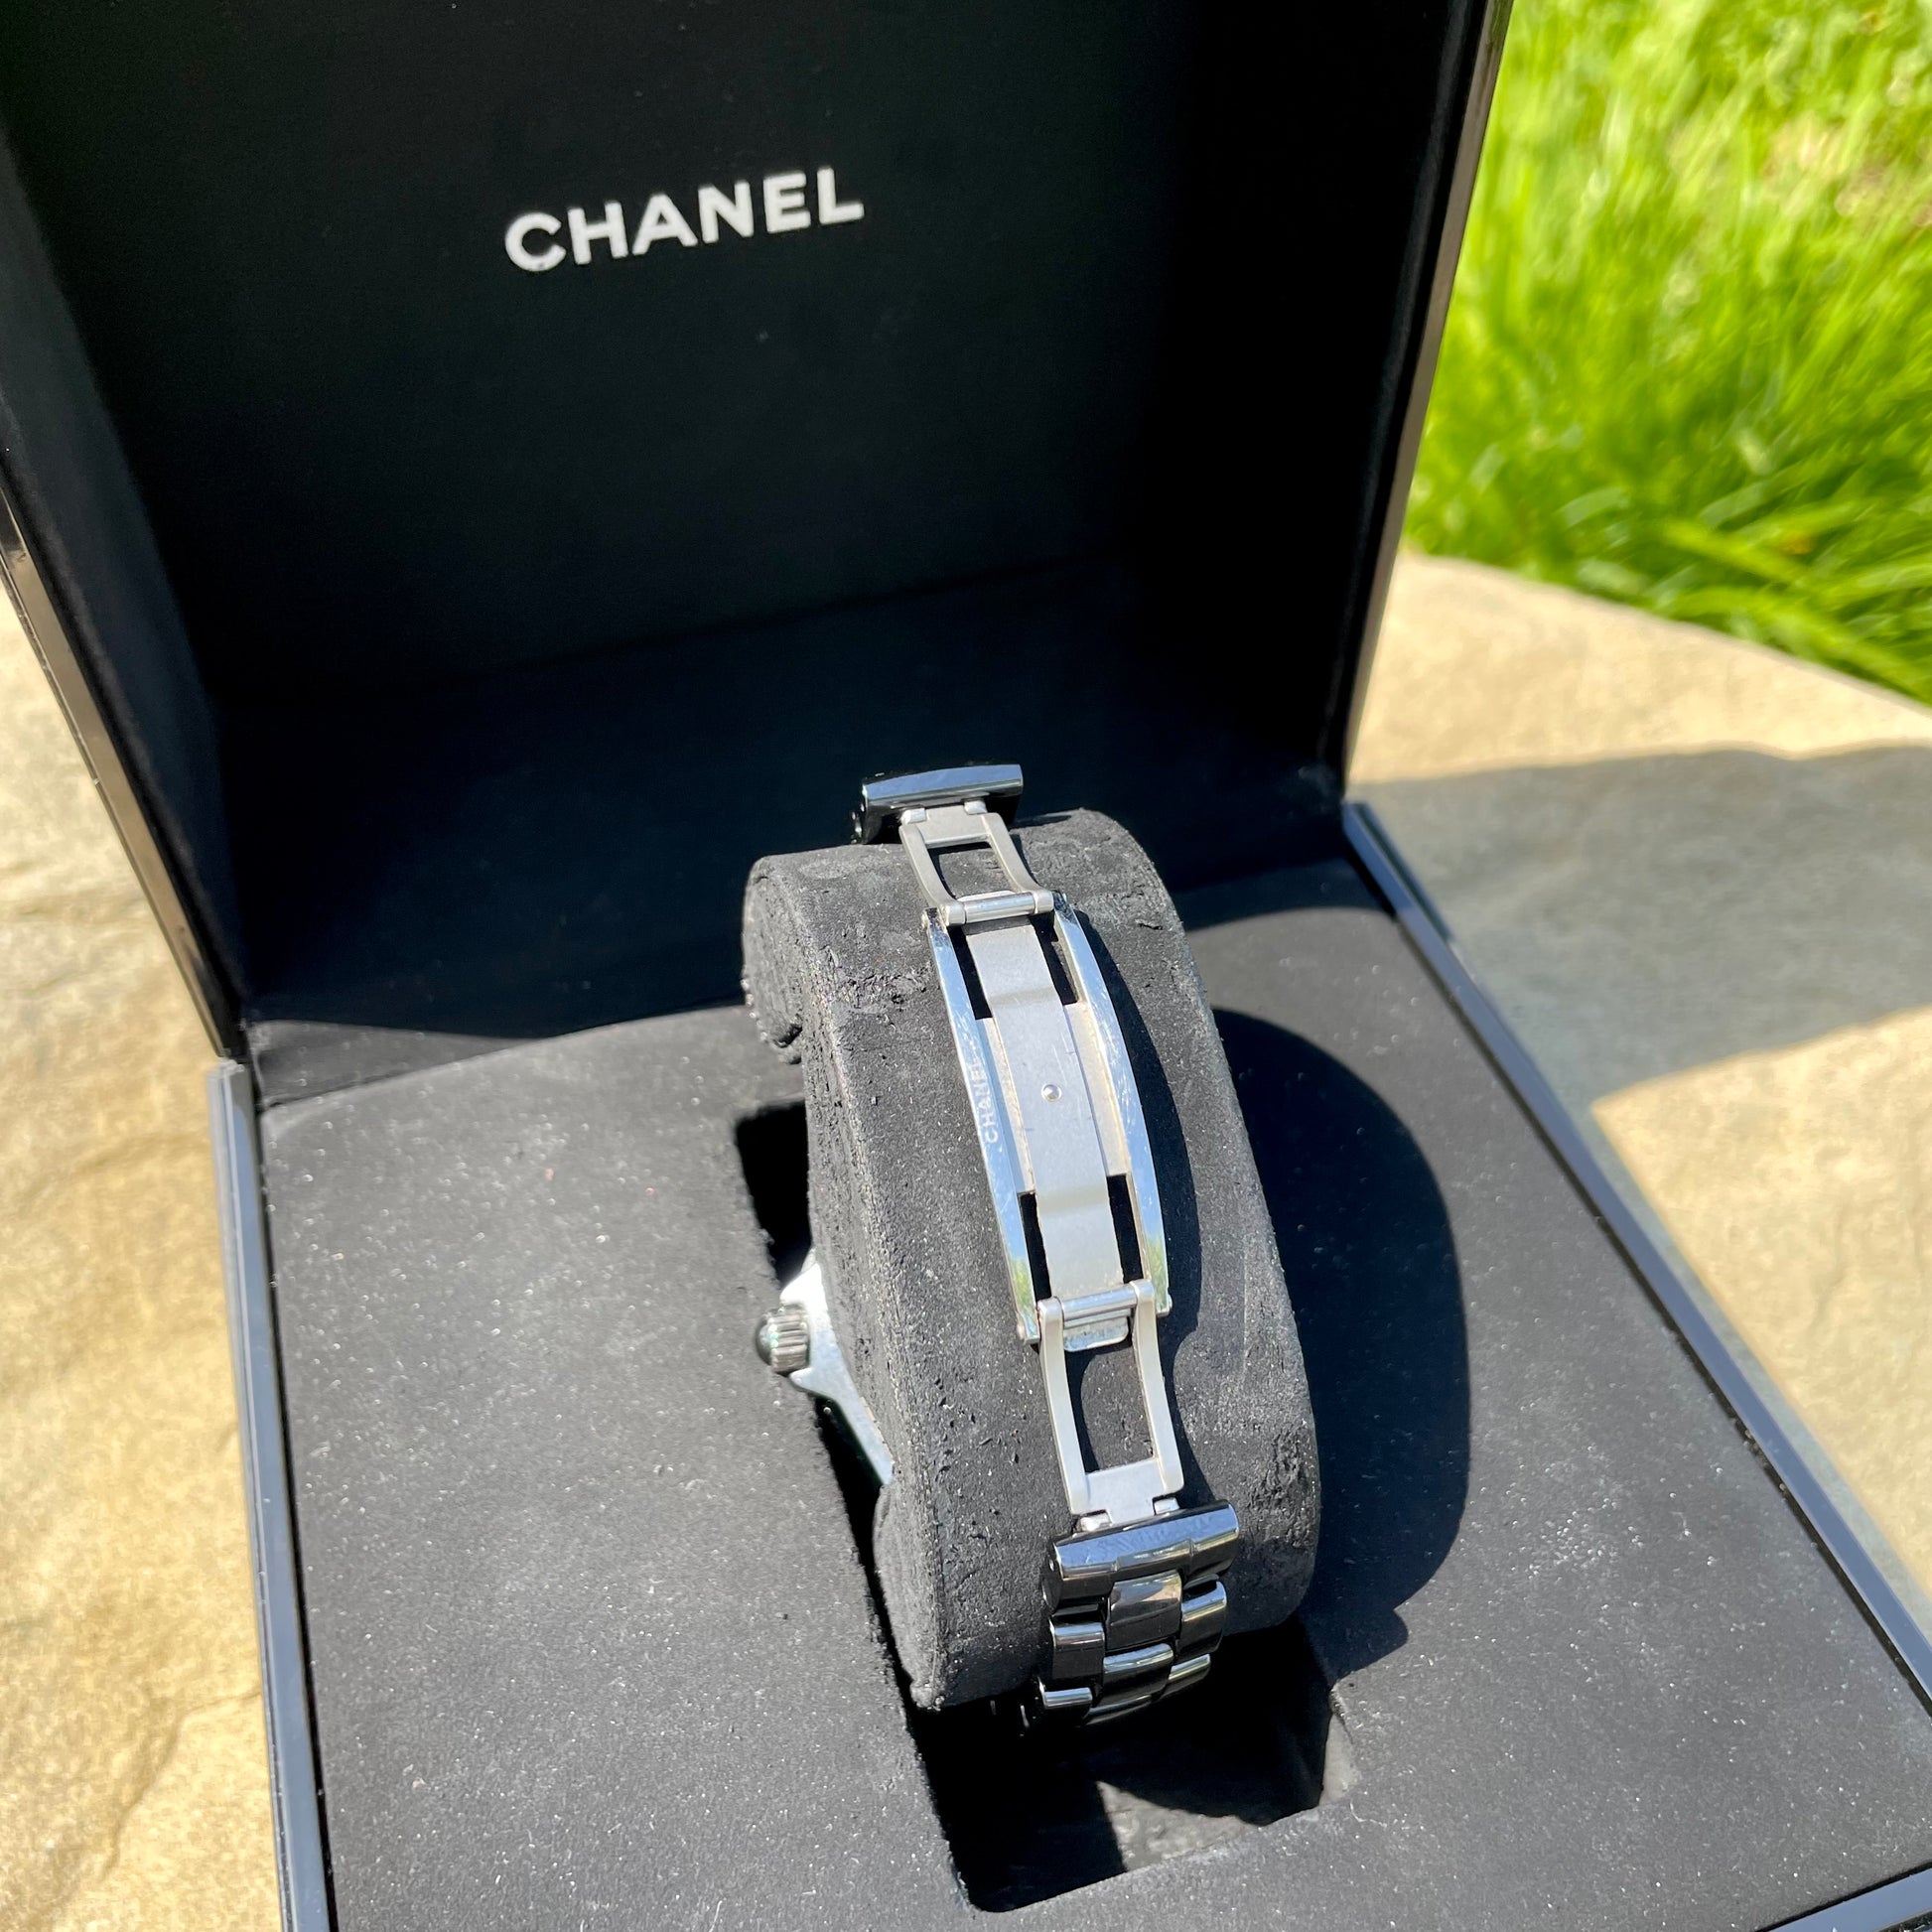 Chanel J12 Quartz Black Ceramic and Stainless Steel 33mm Watch